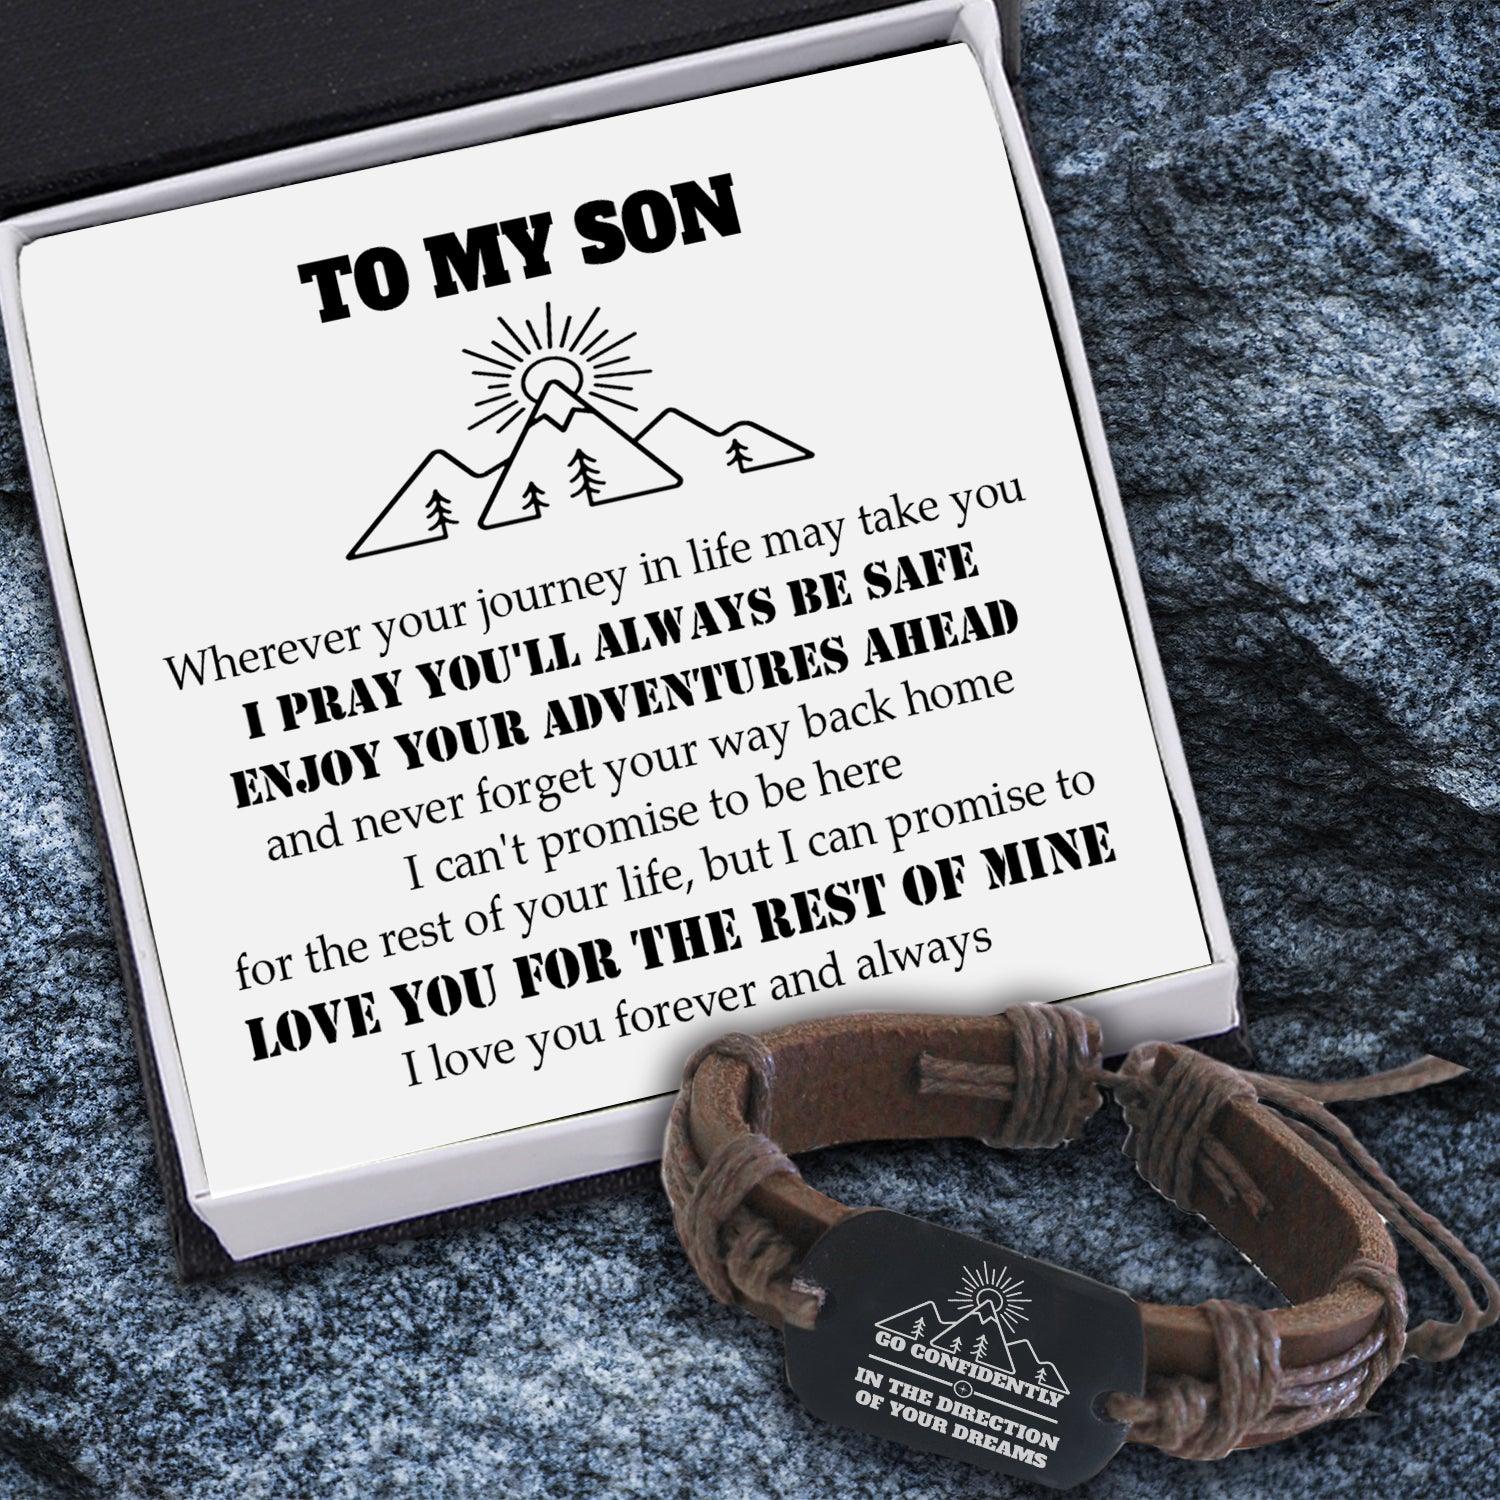 Leather Cord Bracelet - Travel - To My Son - Love You For The Rest Of Mine - Augbr16001 - Gifts Holder